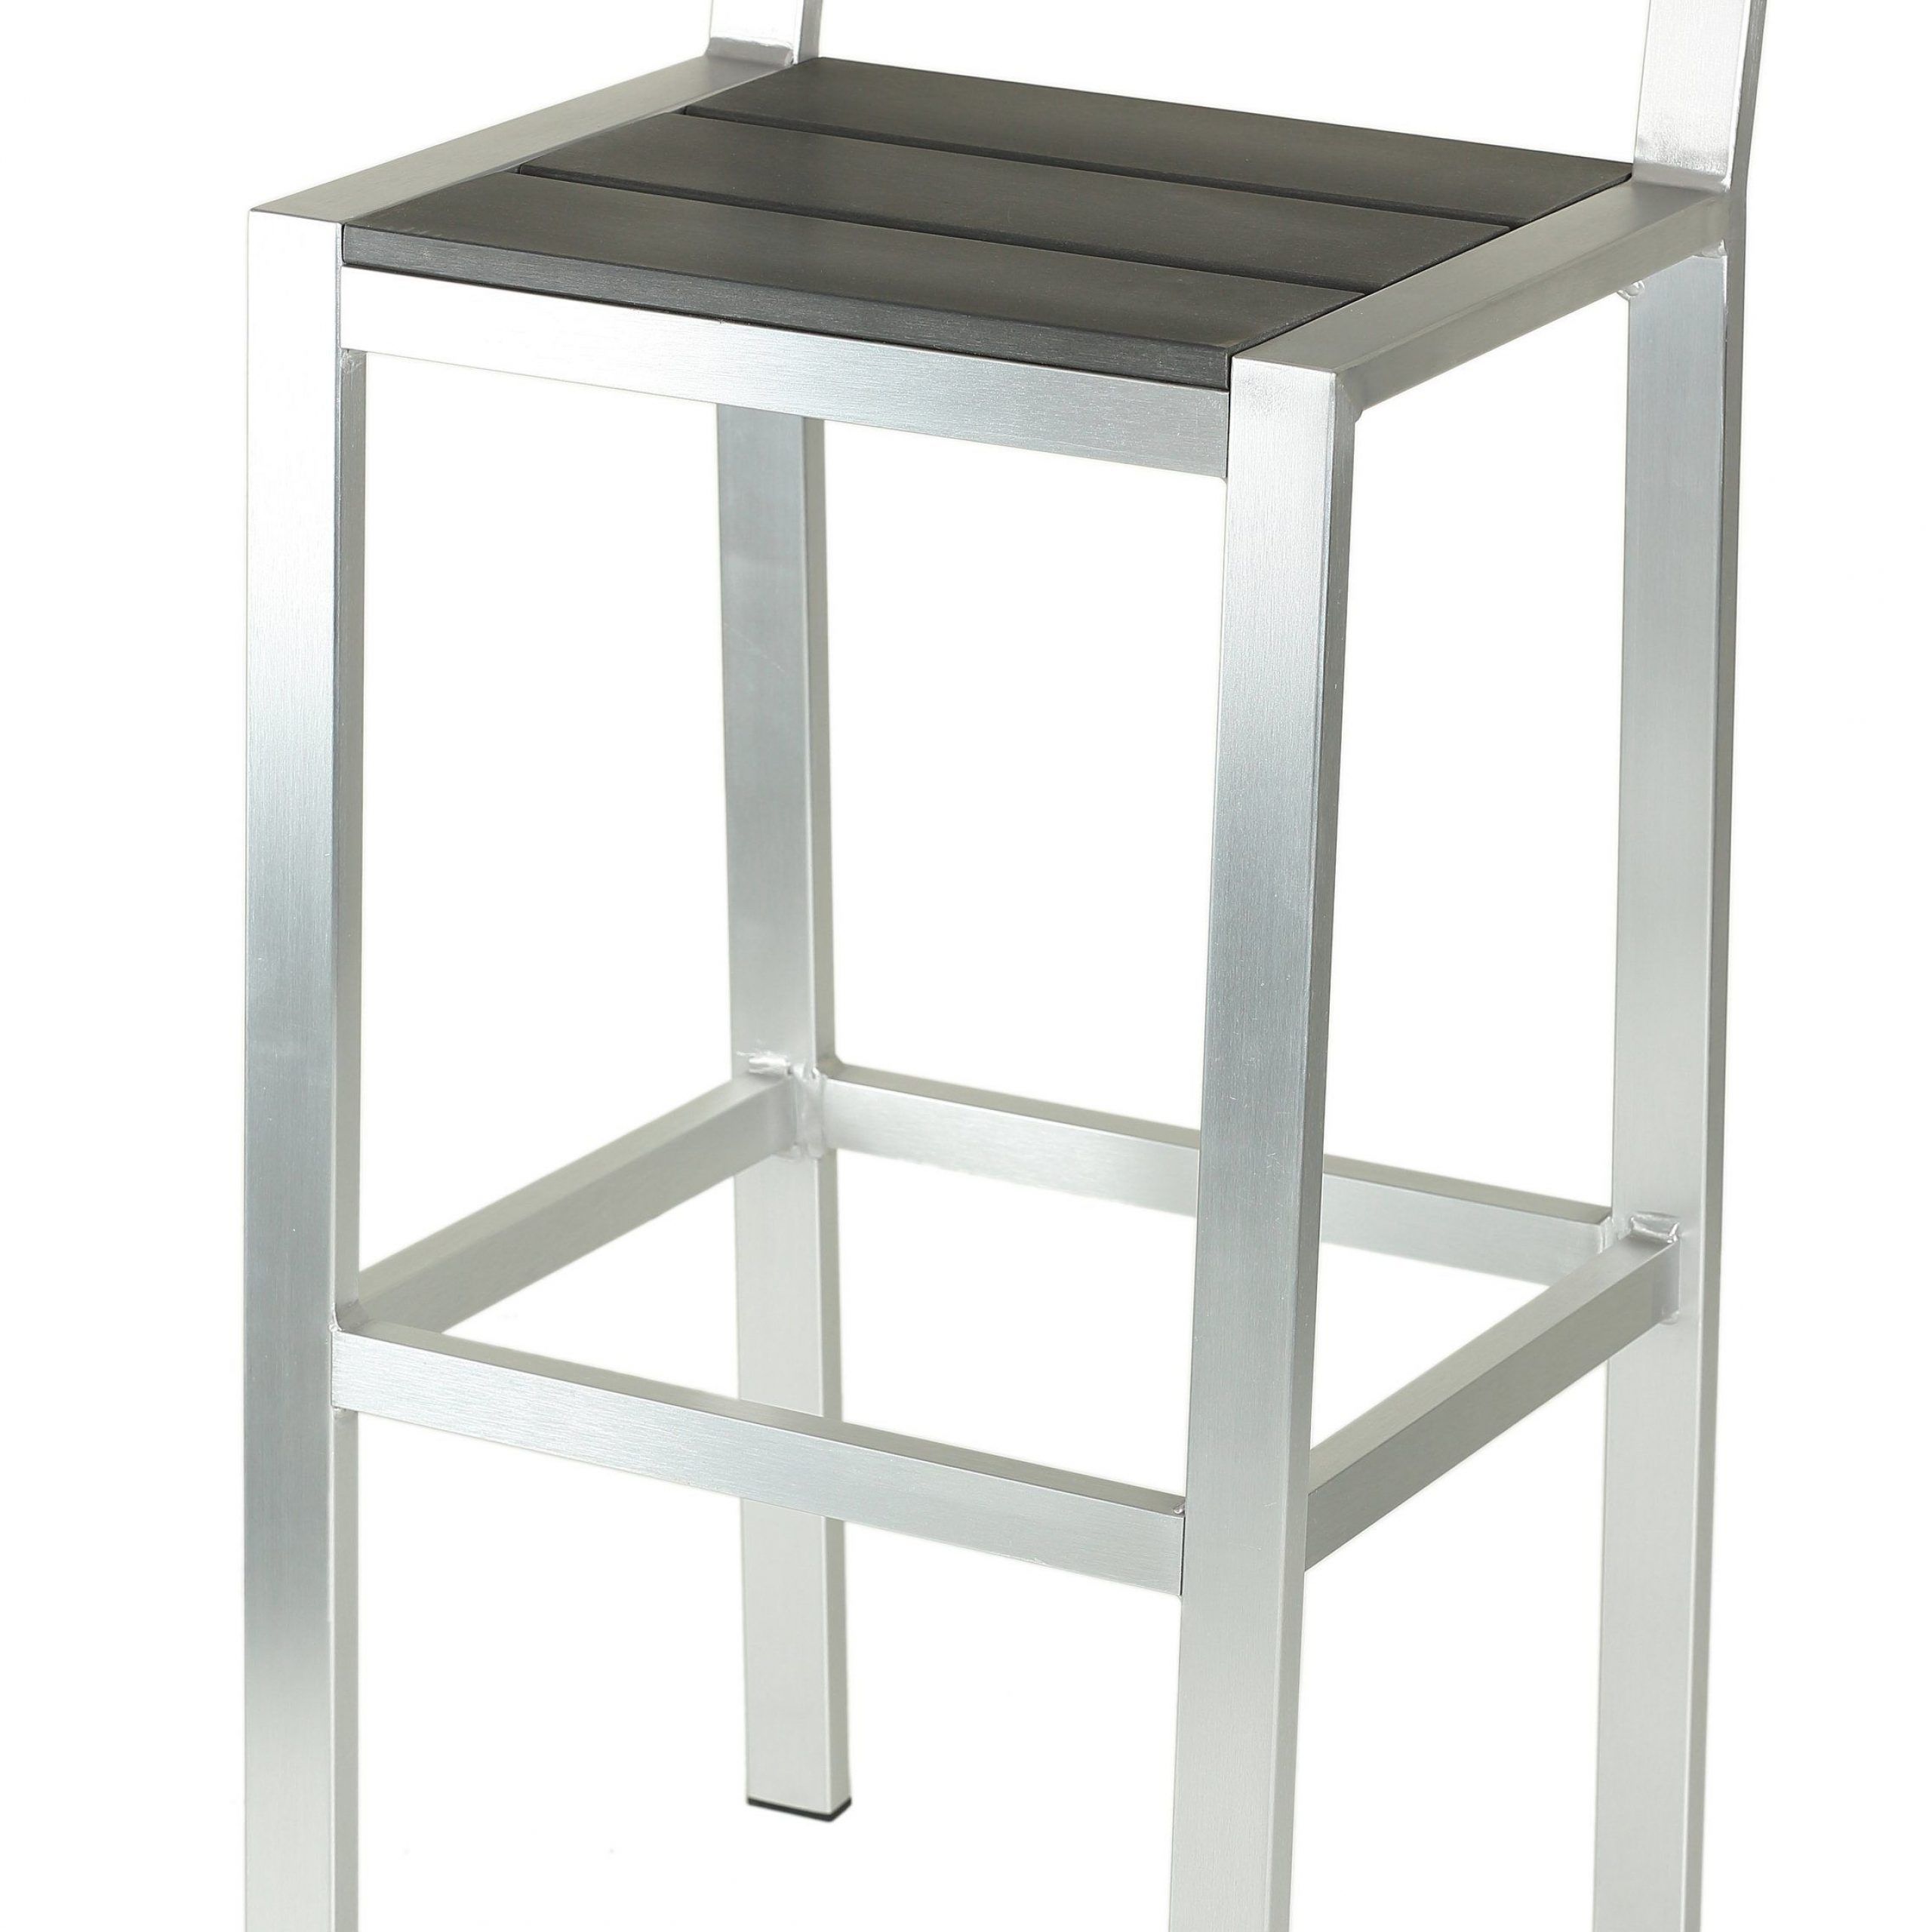 Preferred Haven Aluminum Outdoor Barstool In Slate Grey Poly Resin, Brushed Regarding Gray Nickel Stools (View 8 of 10)